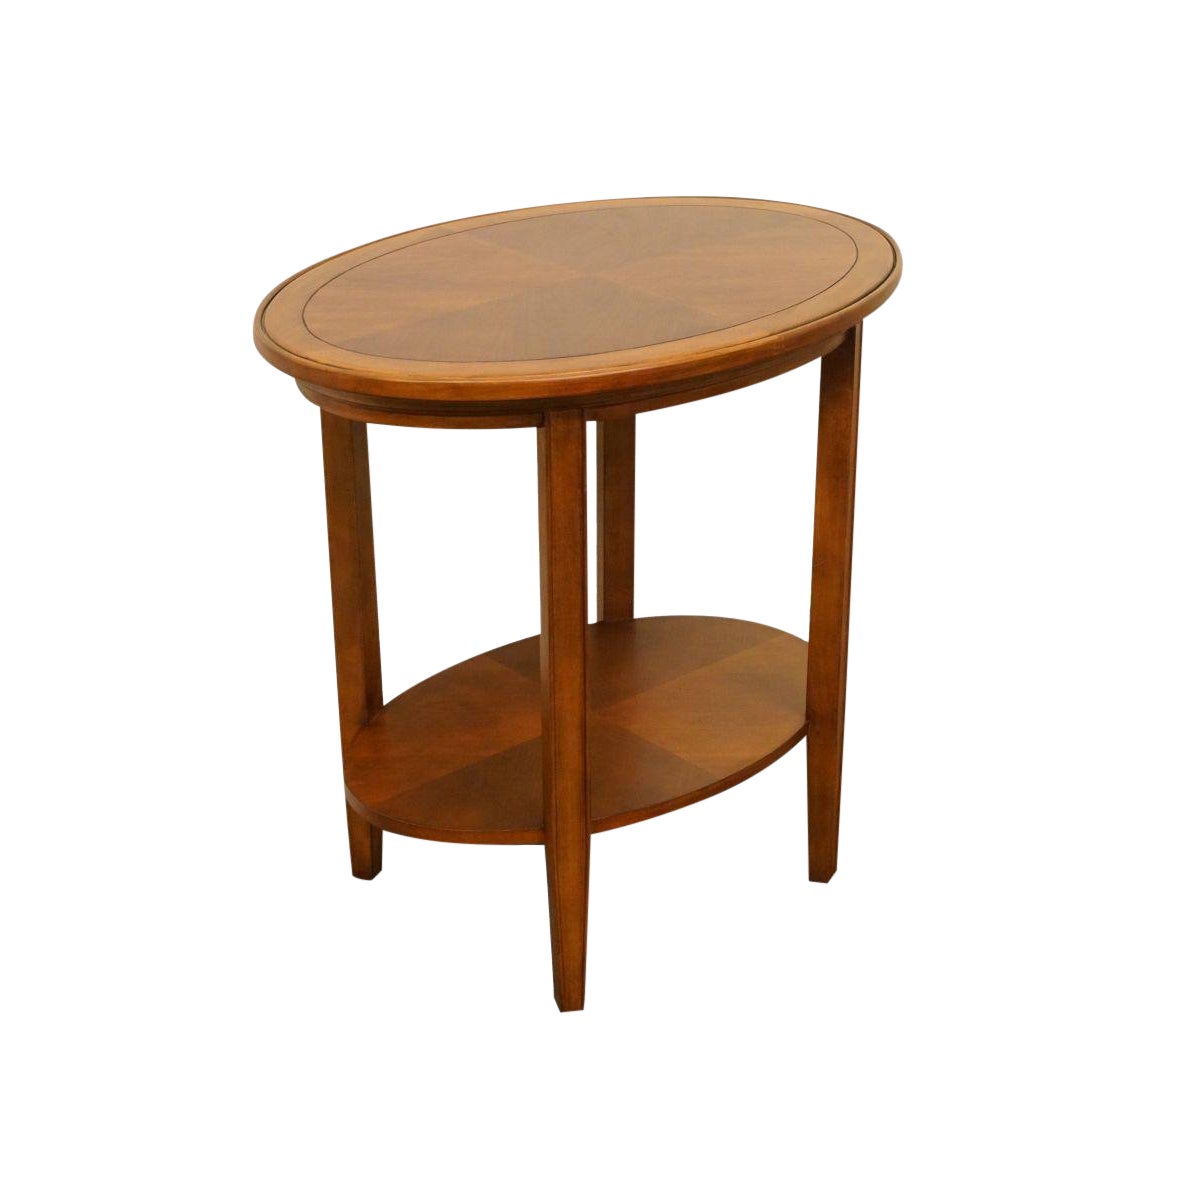 stanley furniture mahogany oval end table chairish tables small mirror storage with drawers big lots mirrored night height standard marble top ashley round metal cocktail leons